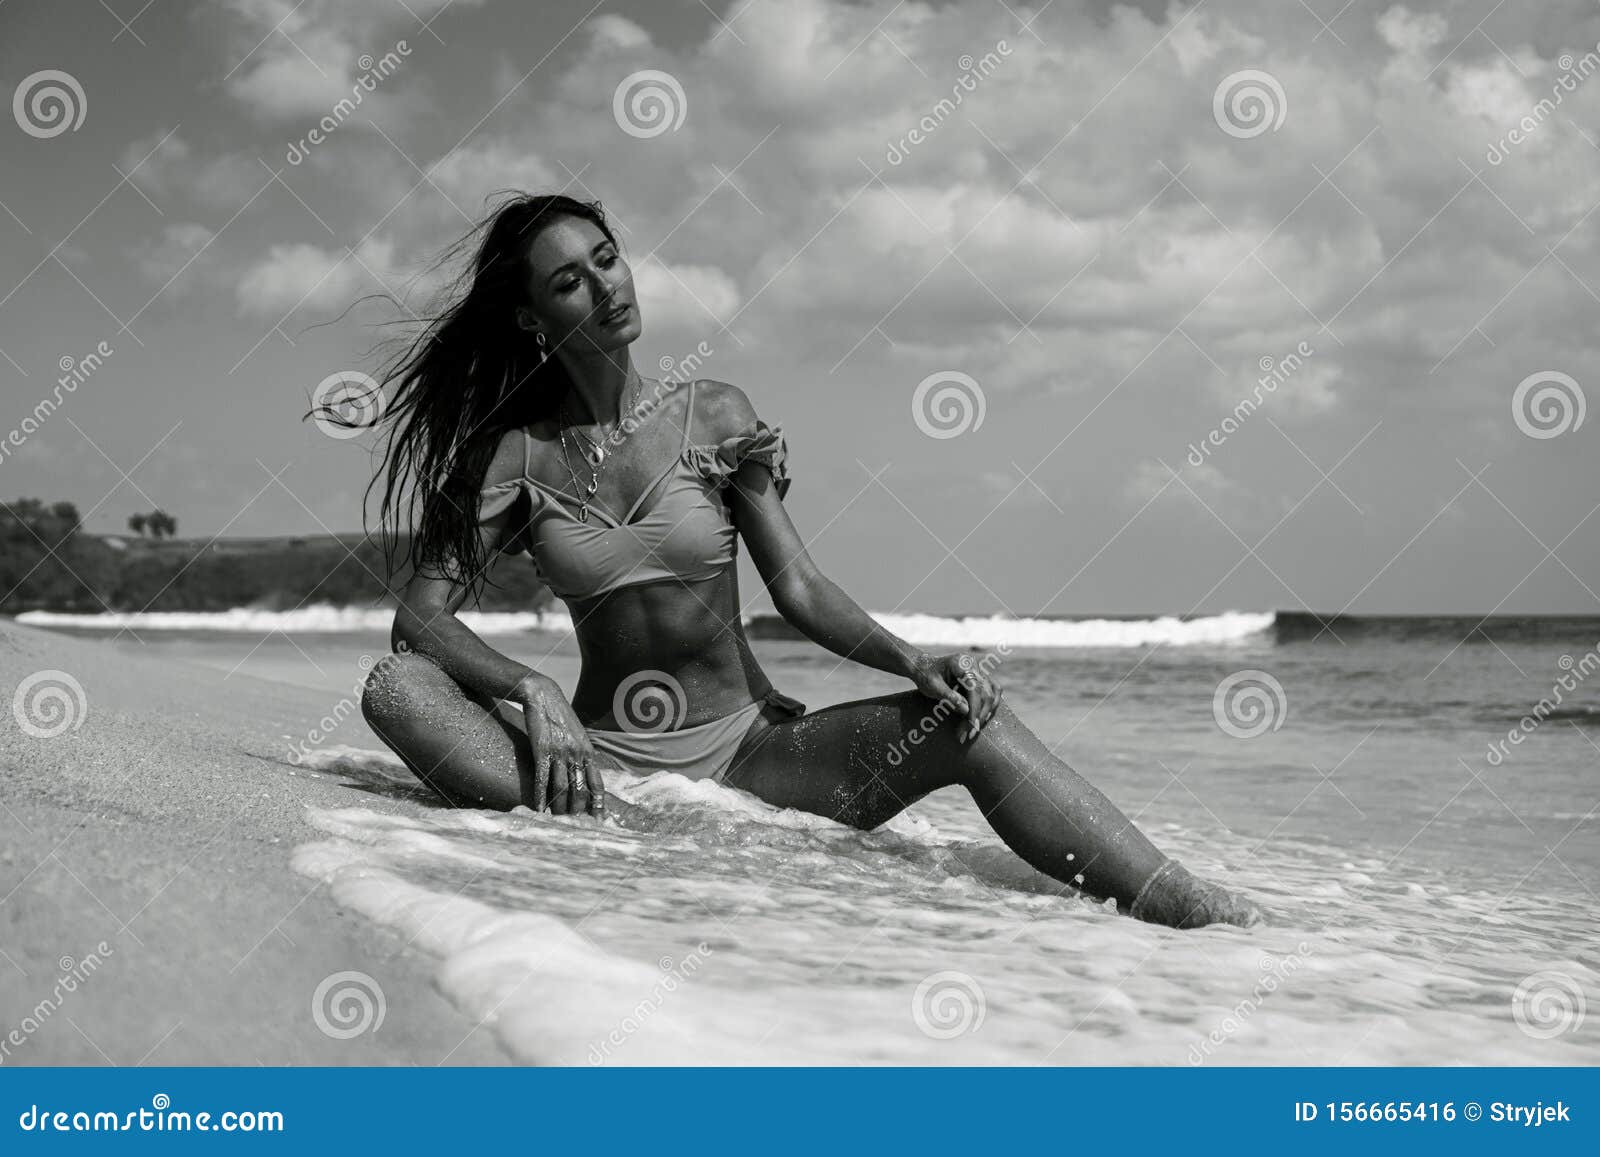 Beautiful Fitness Woman in Bikini Posing at the Beach Stock Photo picture image picture